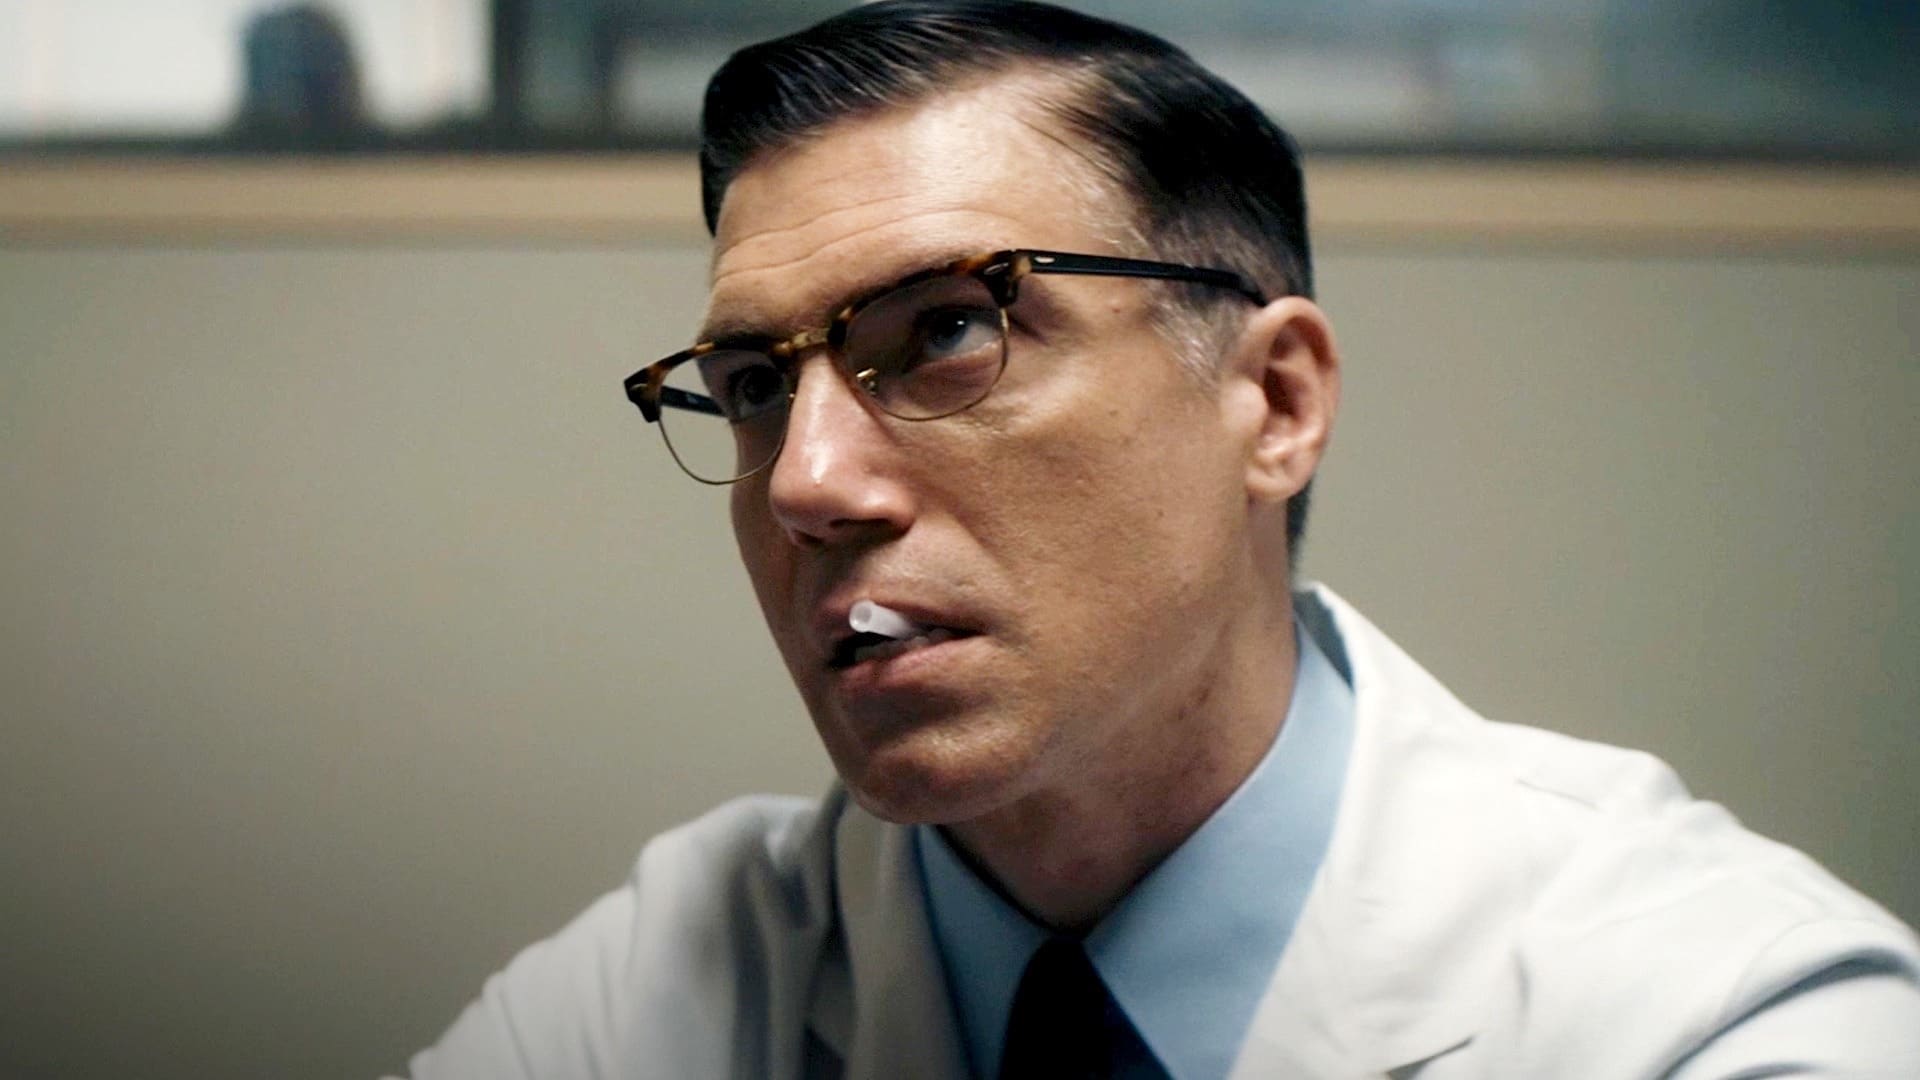 Anson Mount as Dr Strauss